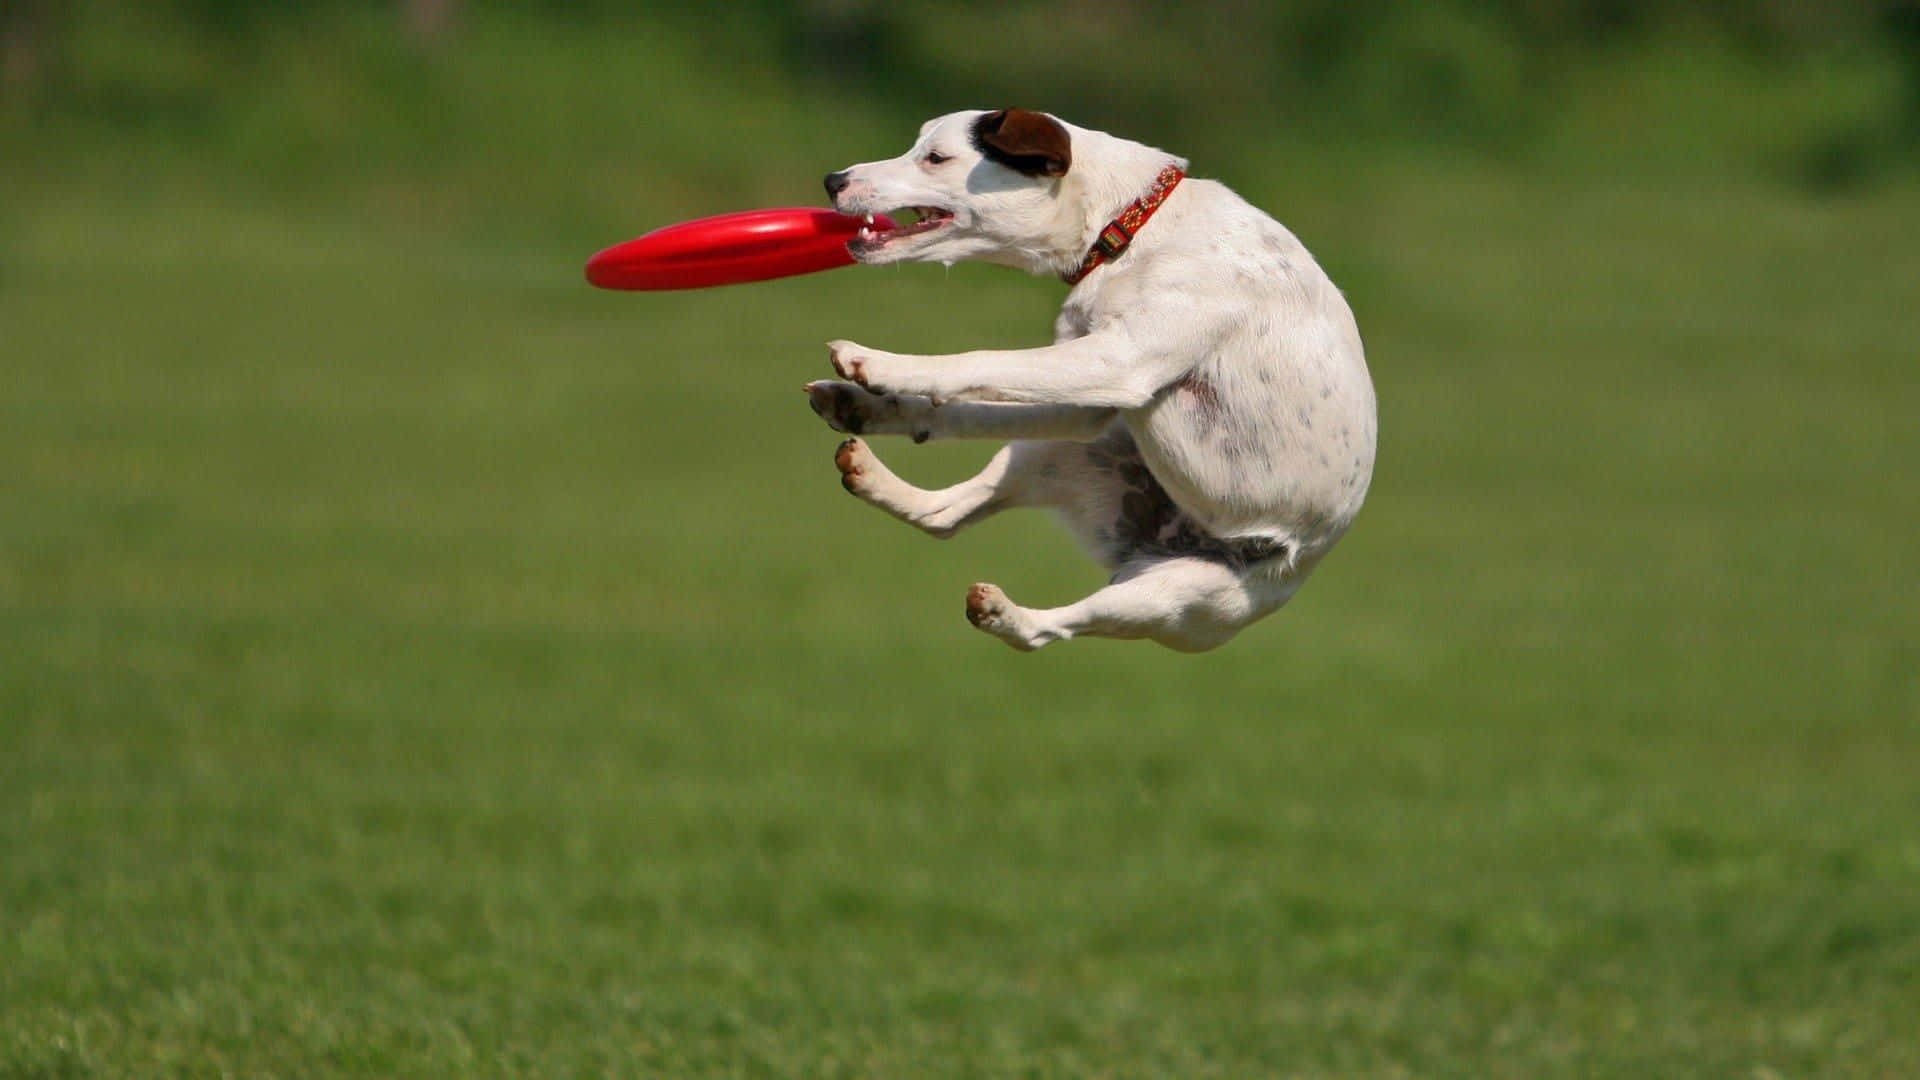 Flying High With HD Frisbee